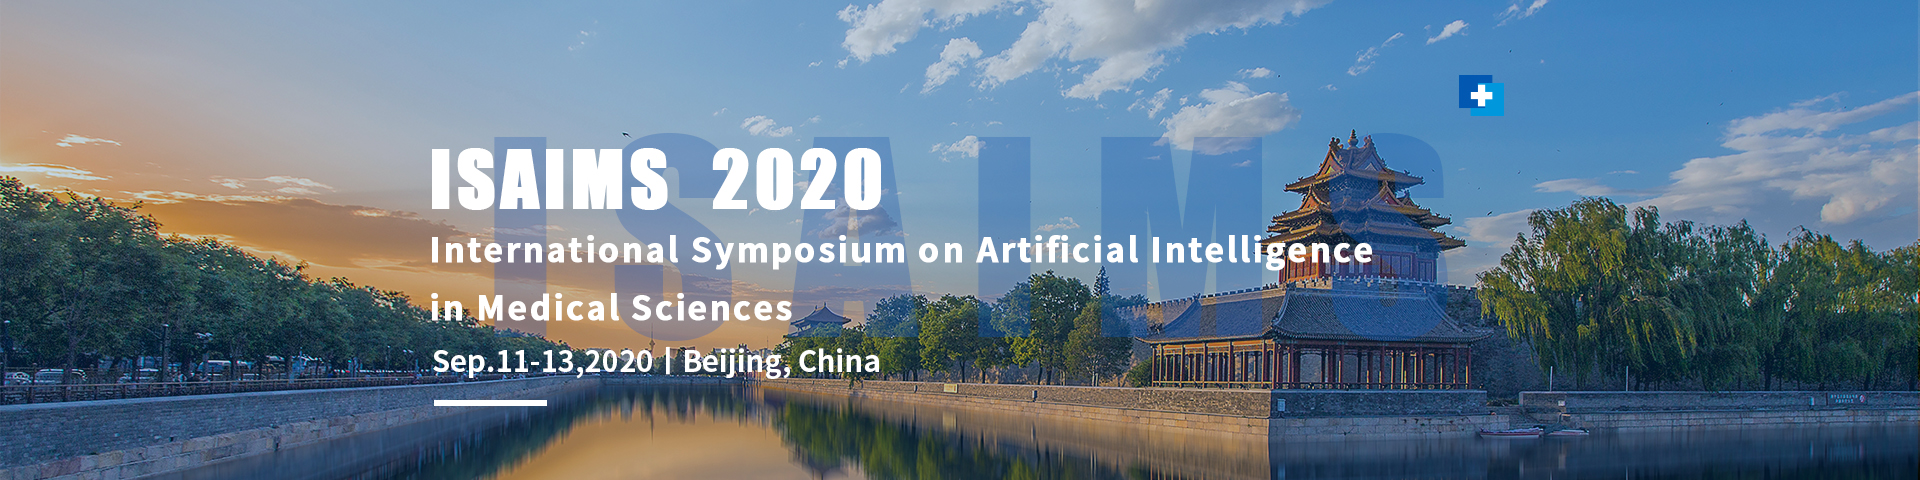 2020 International Symposium on Artificial Intelligence in Medical Sciences（ISAIMS 2020）, Beijing, China